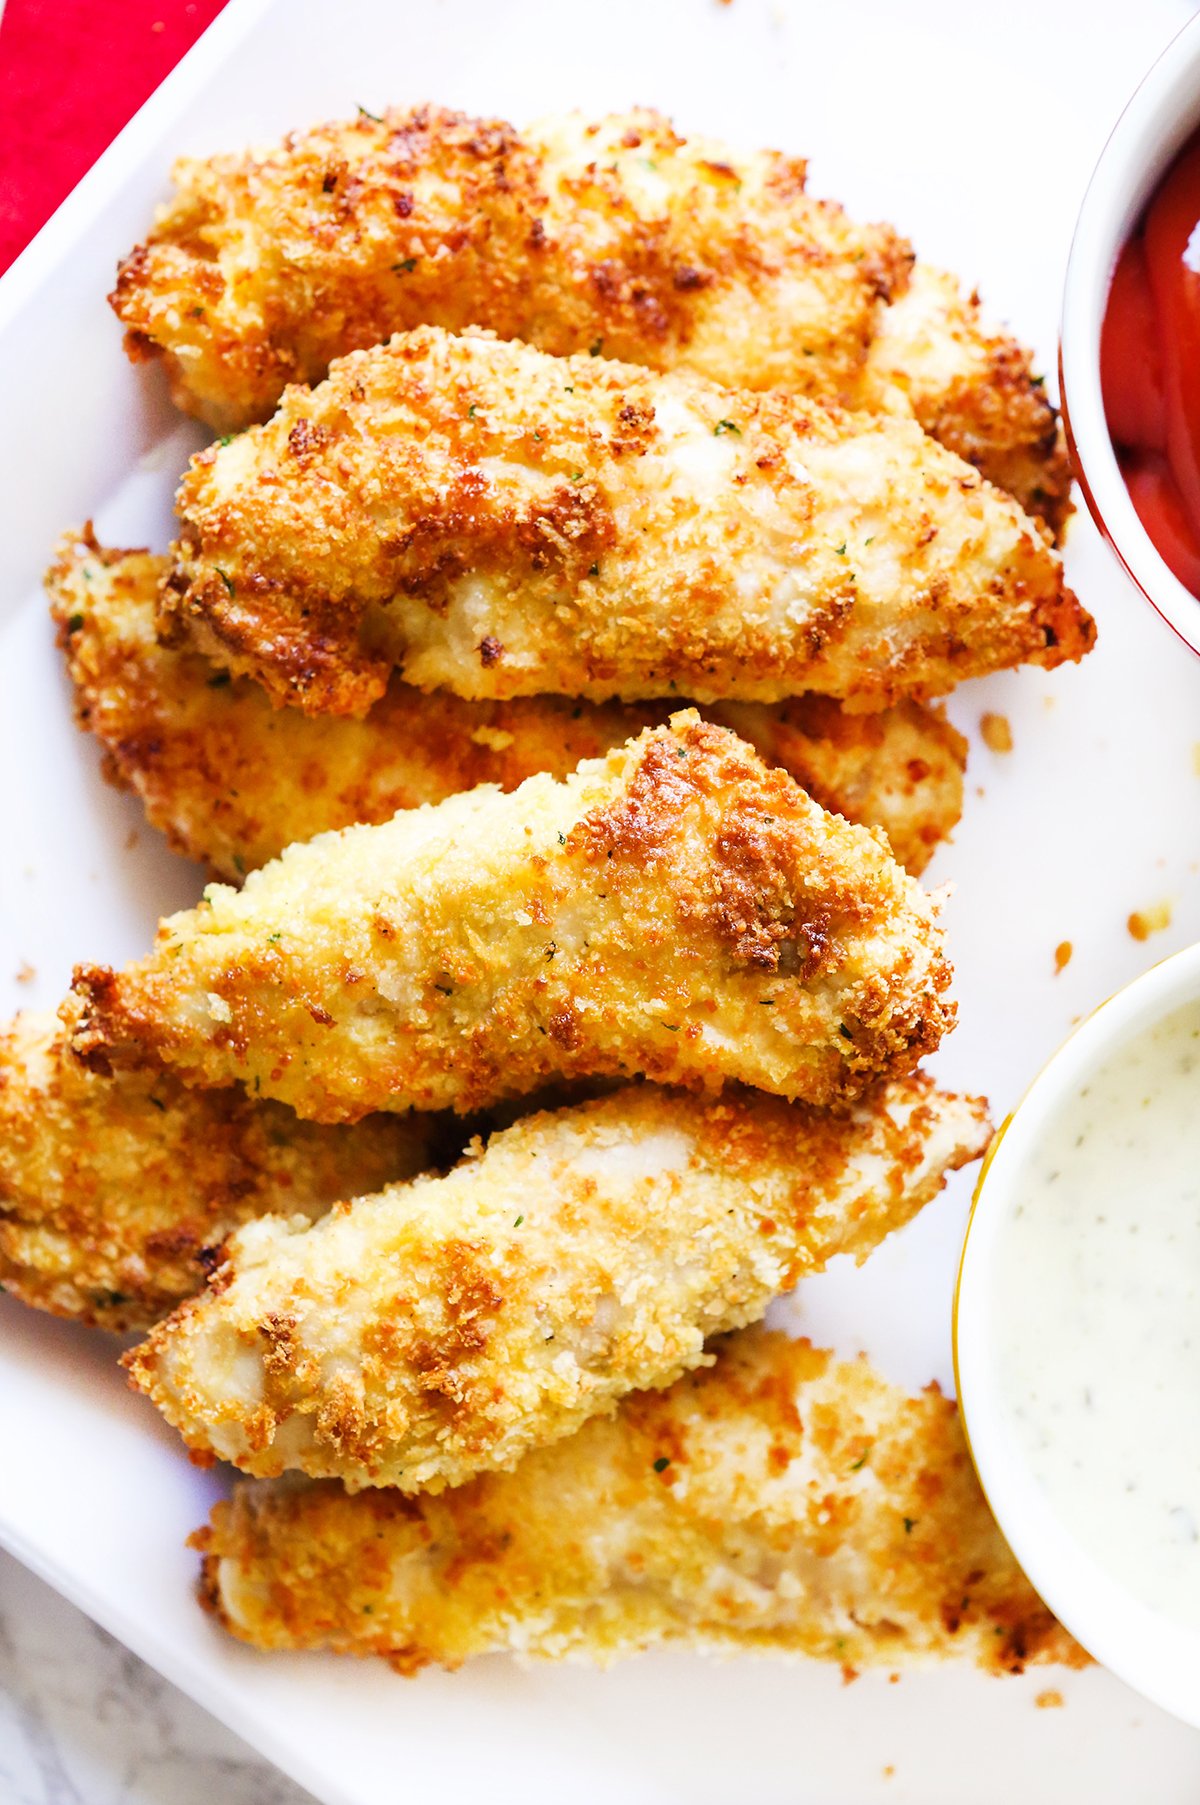 Crispy chicken tenders lined up on a serving plate with dipping sauces tucked in.